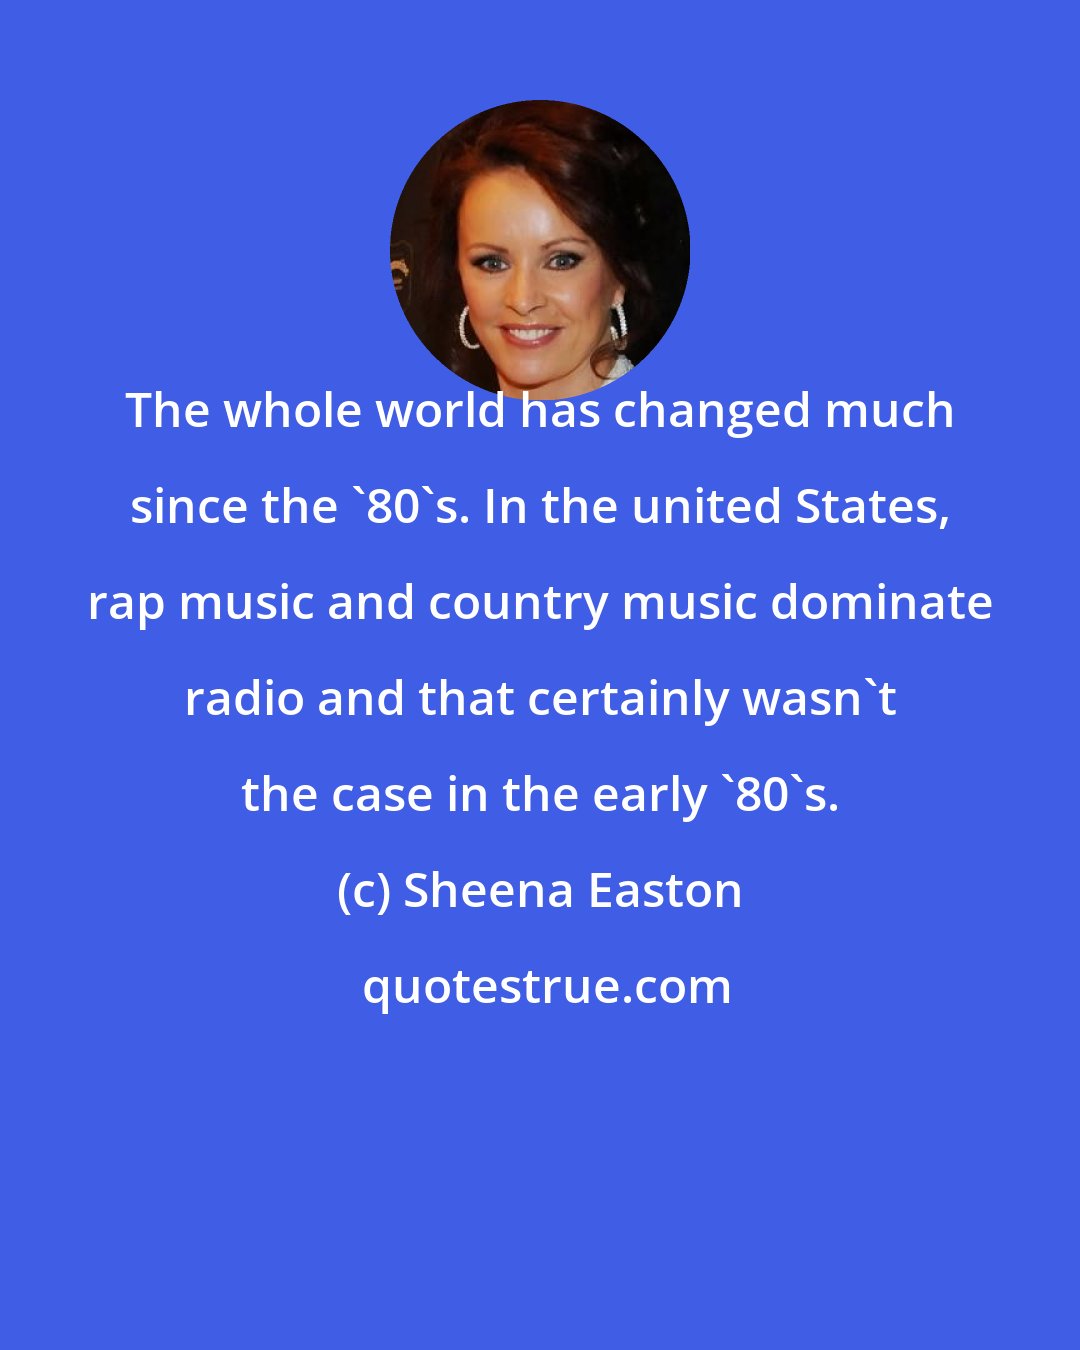 Sheena Easton: The whole world has changed much since the '80's. In the united States, rap music and country music dominate radio and that certainly wasn't the case in the early '80's.